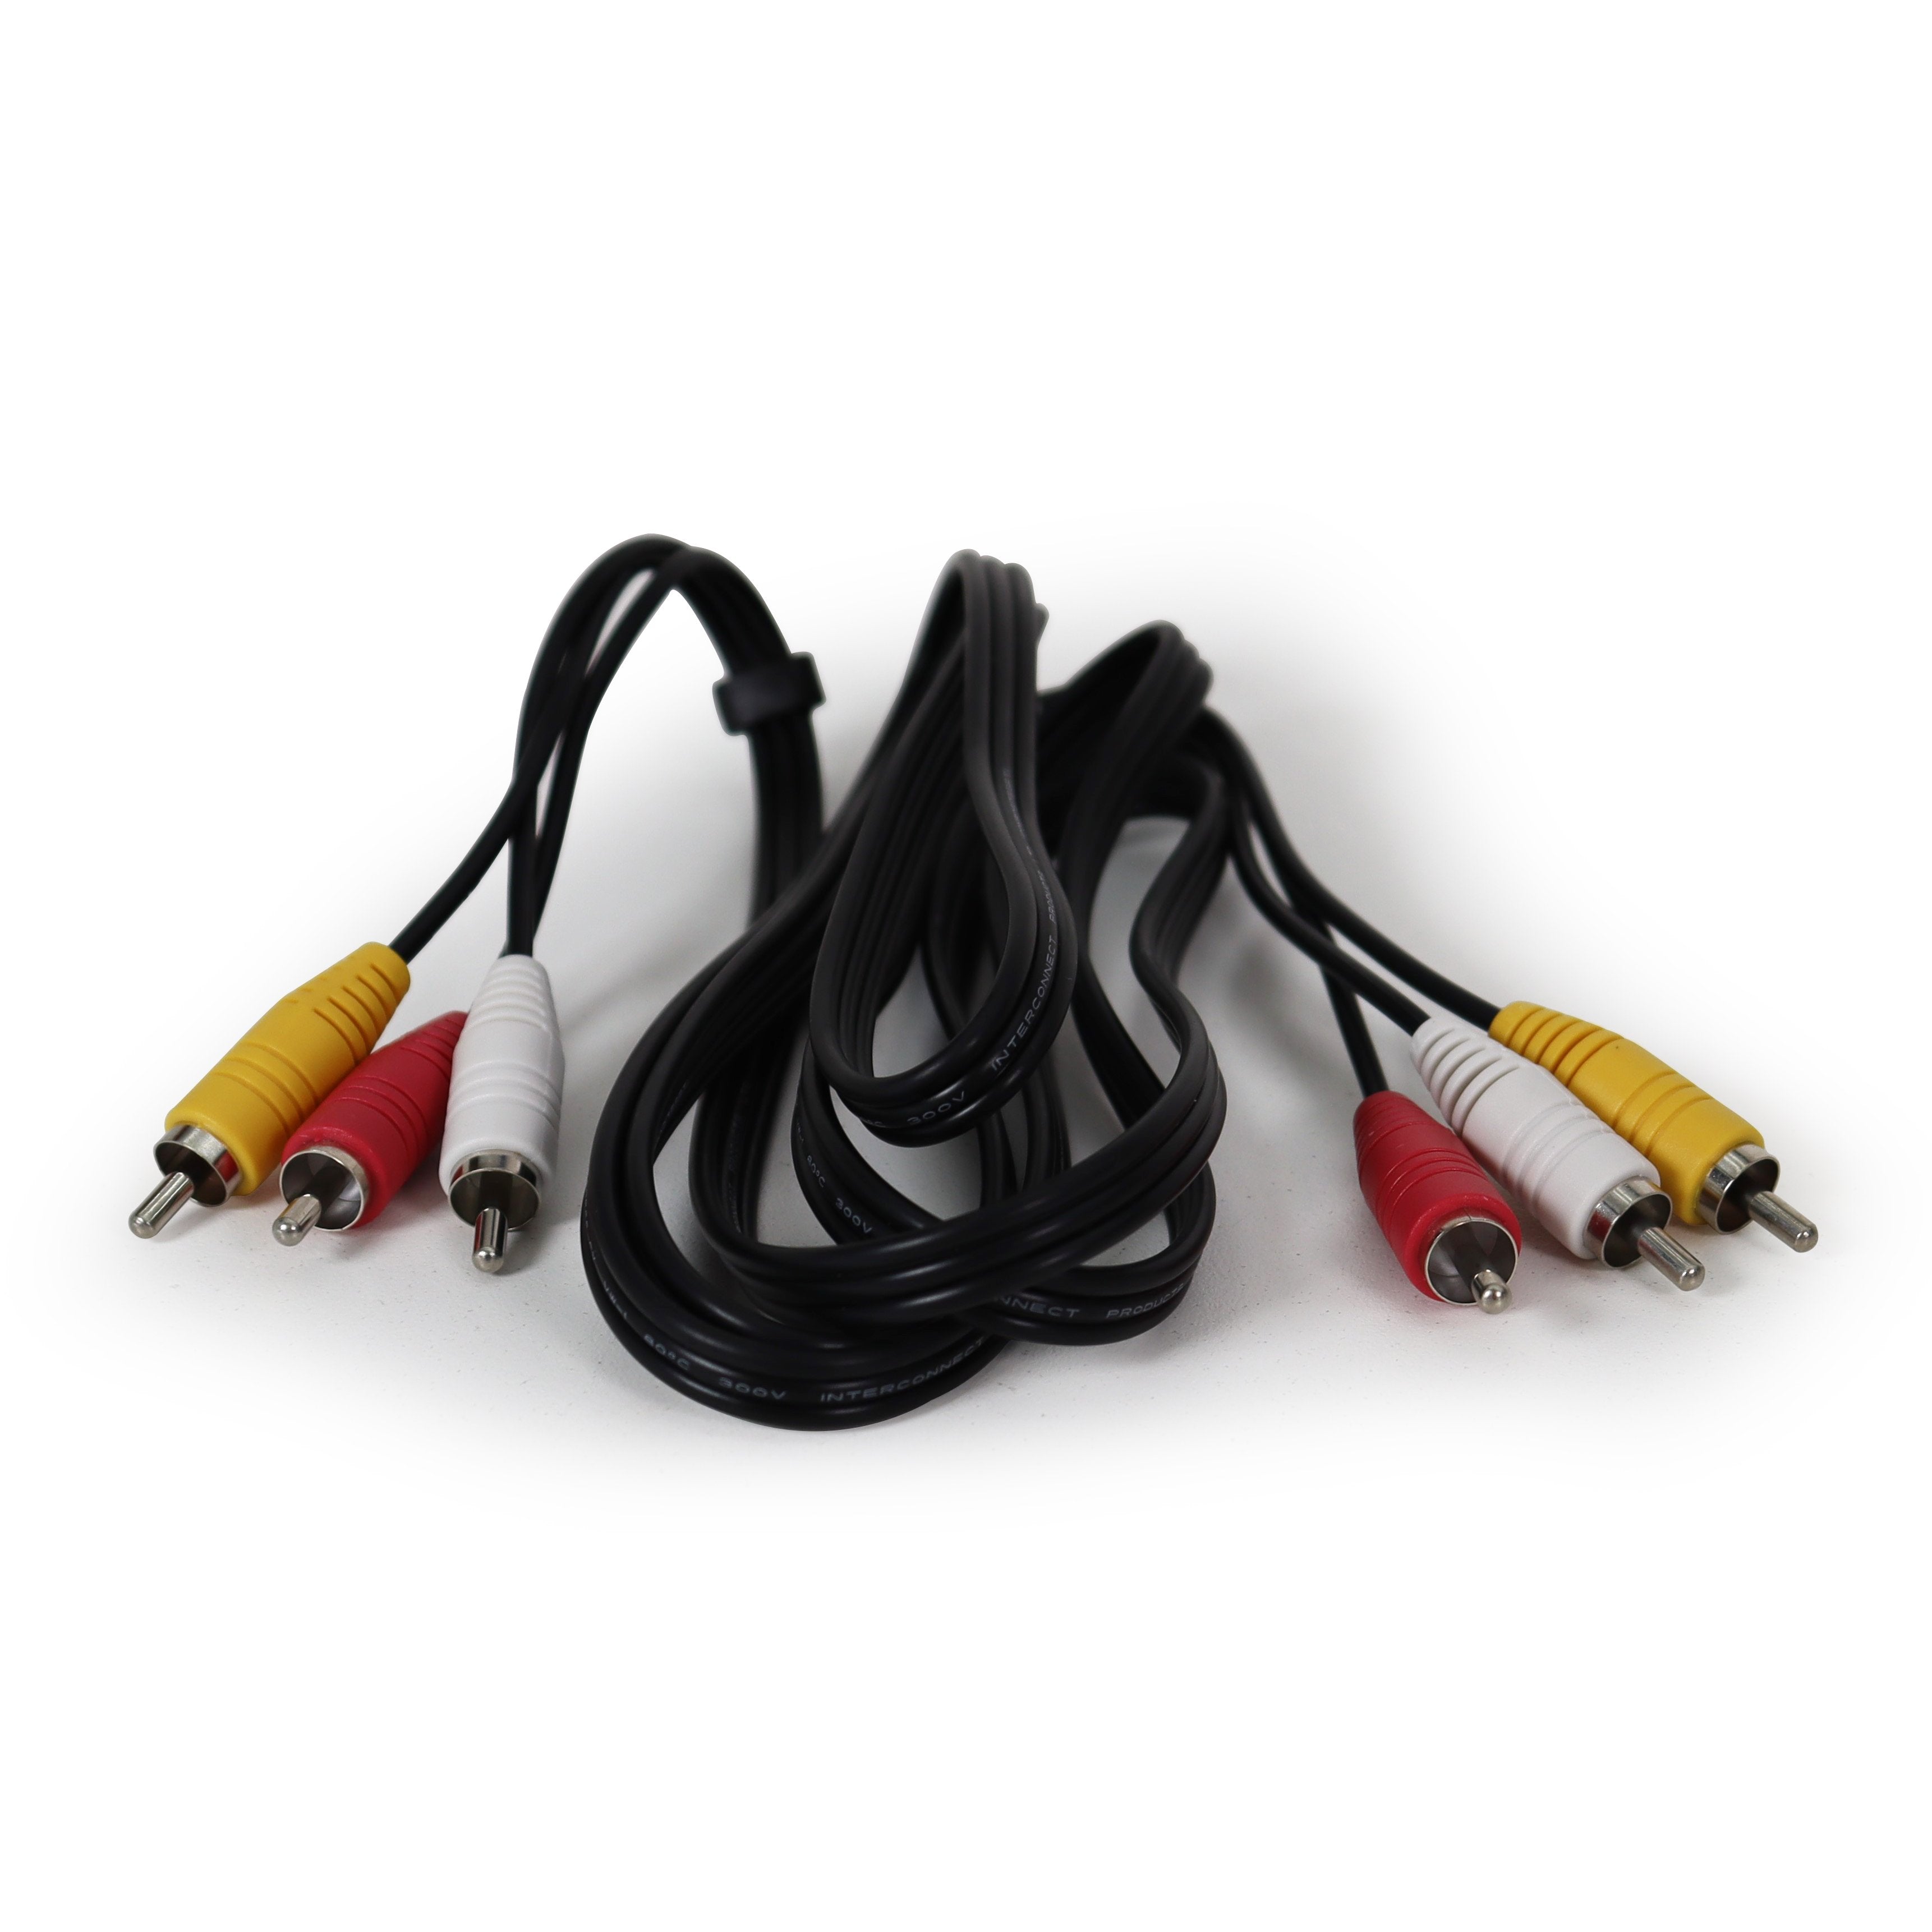 Composite Red/White/Yellow A/V Cables for VHS Player an